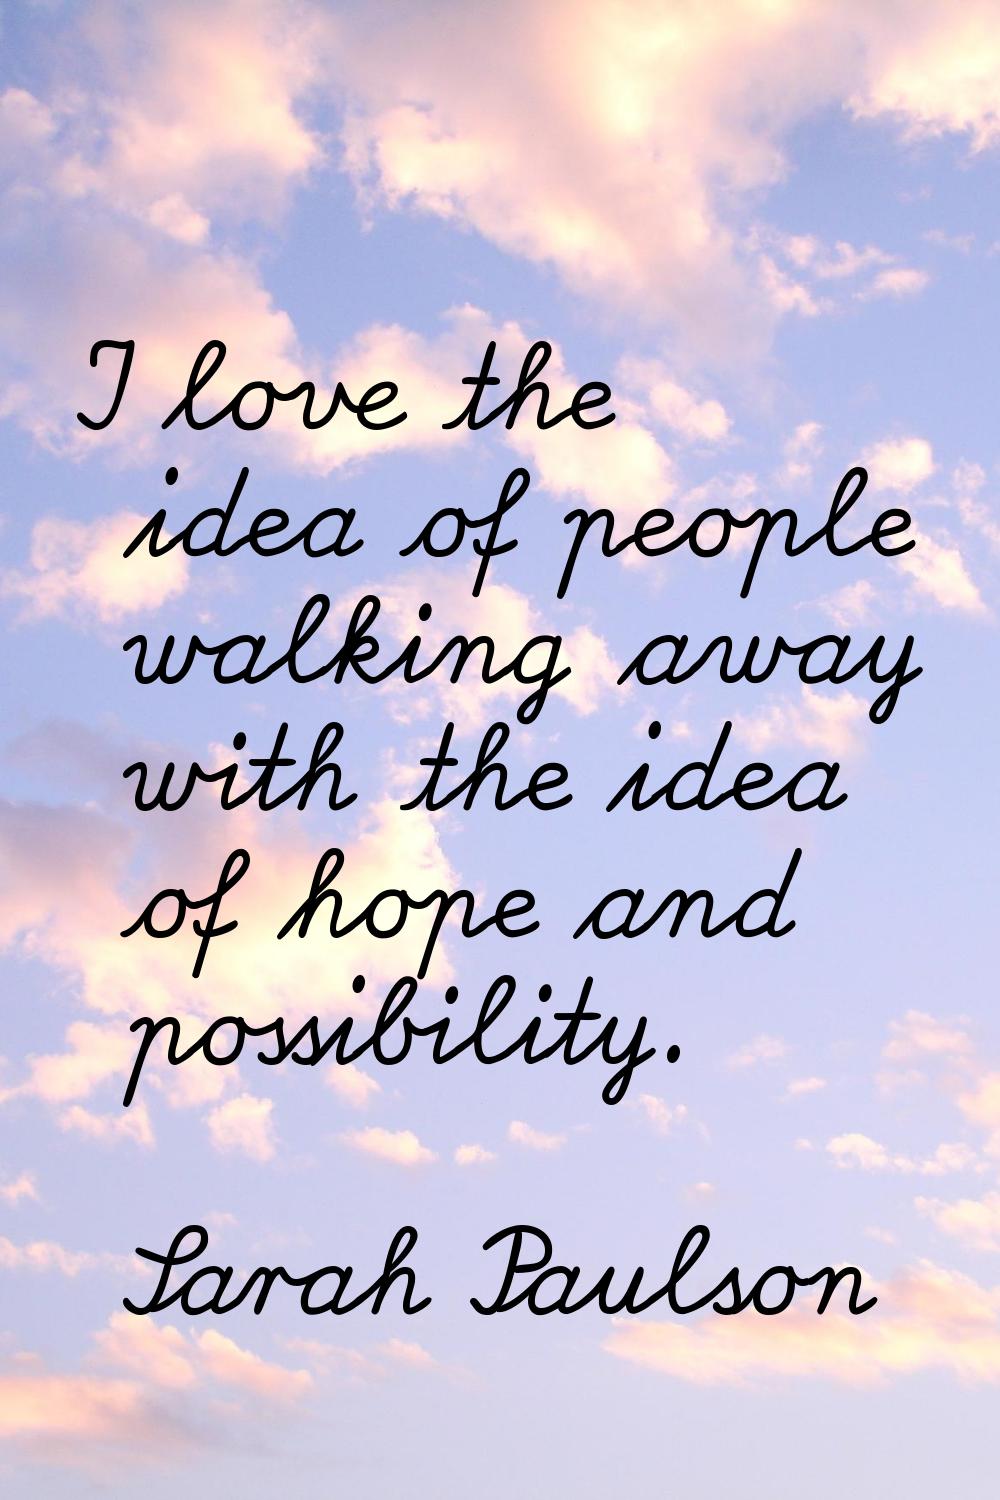 I love the idea of people walking away with the idea of hope and possibility.